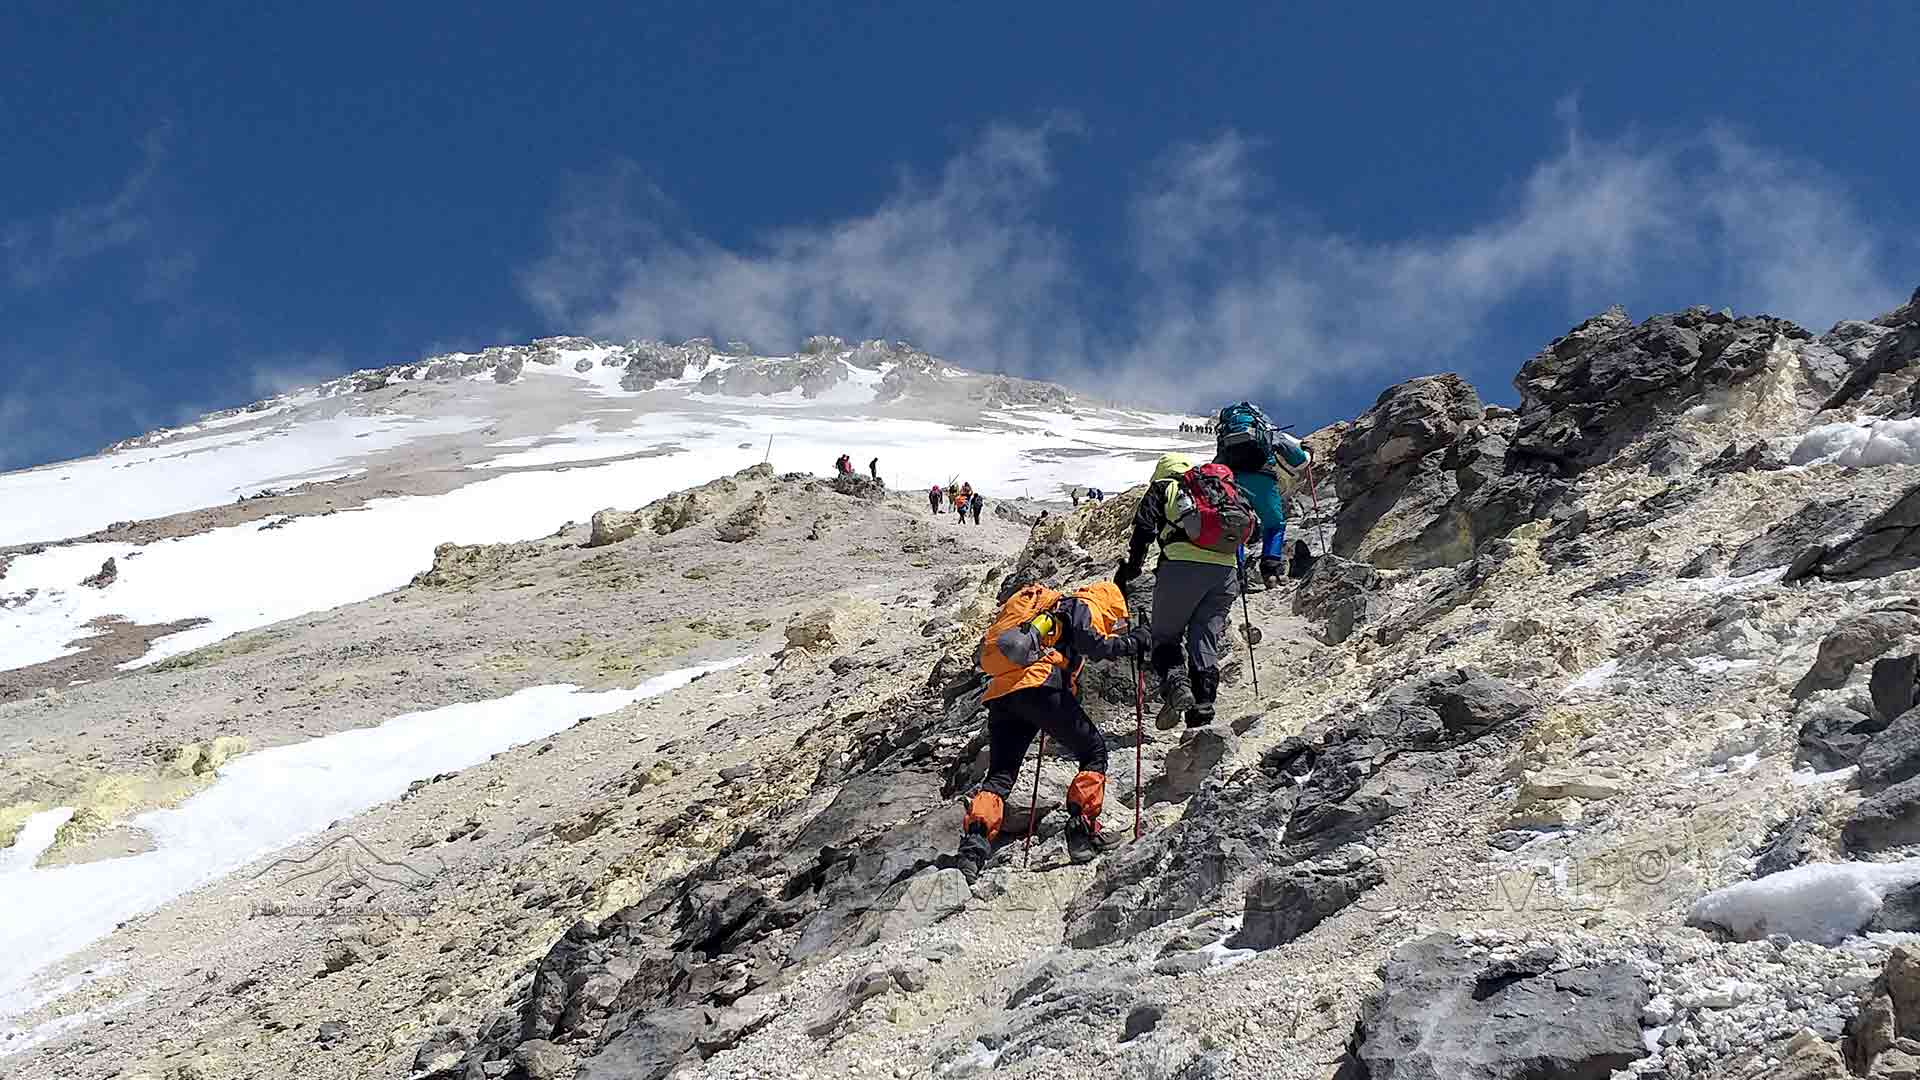 The route to peak in summer ascents